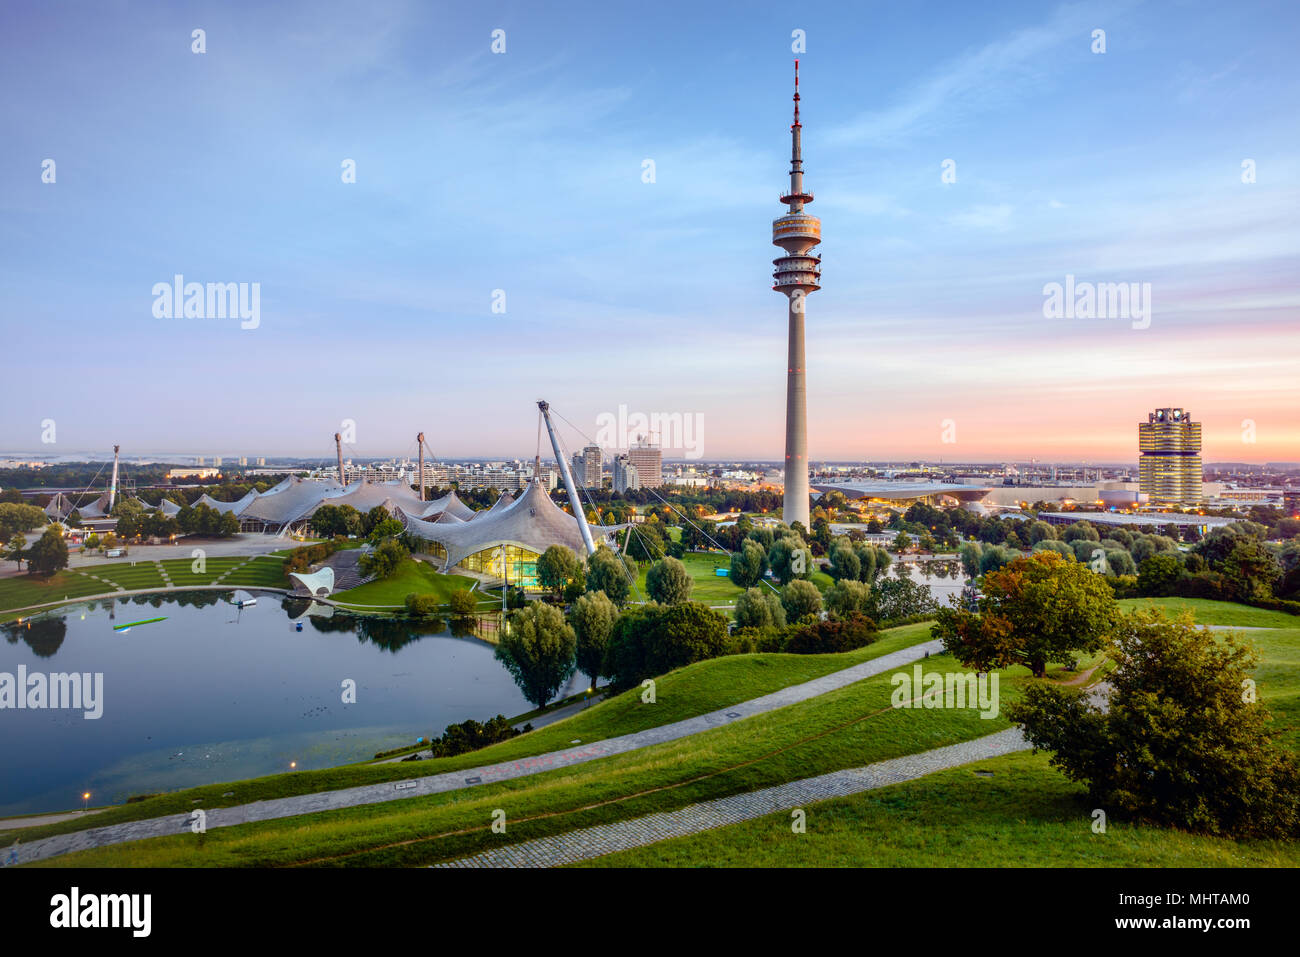 City Skyline of Munich - Olympiapark with TV Tower (Olympia Tower) Stock Photo